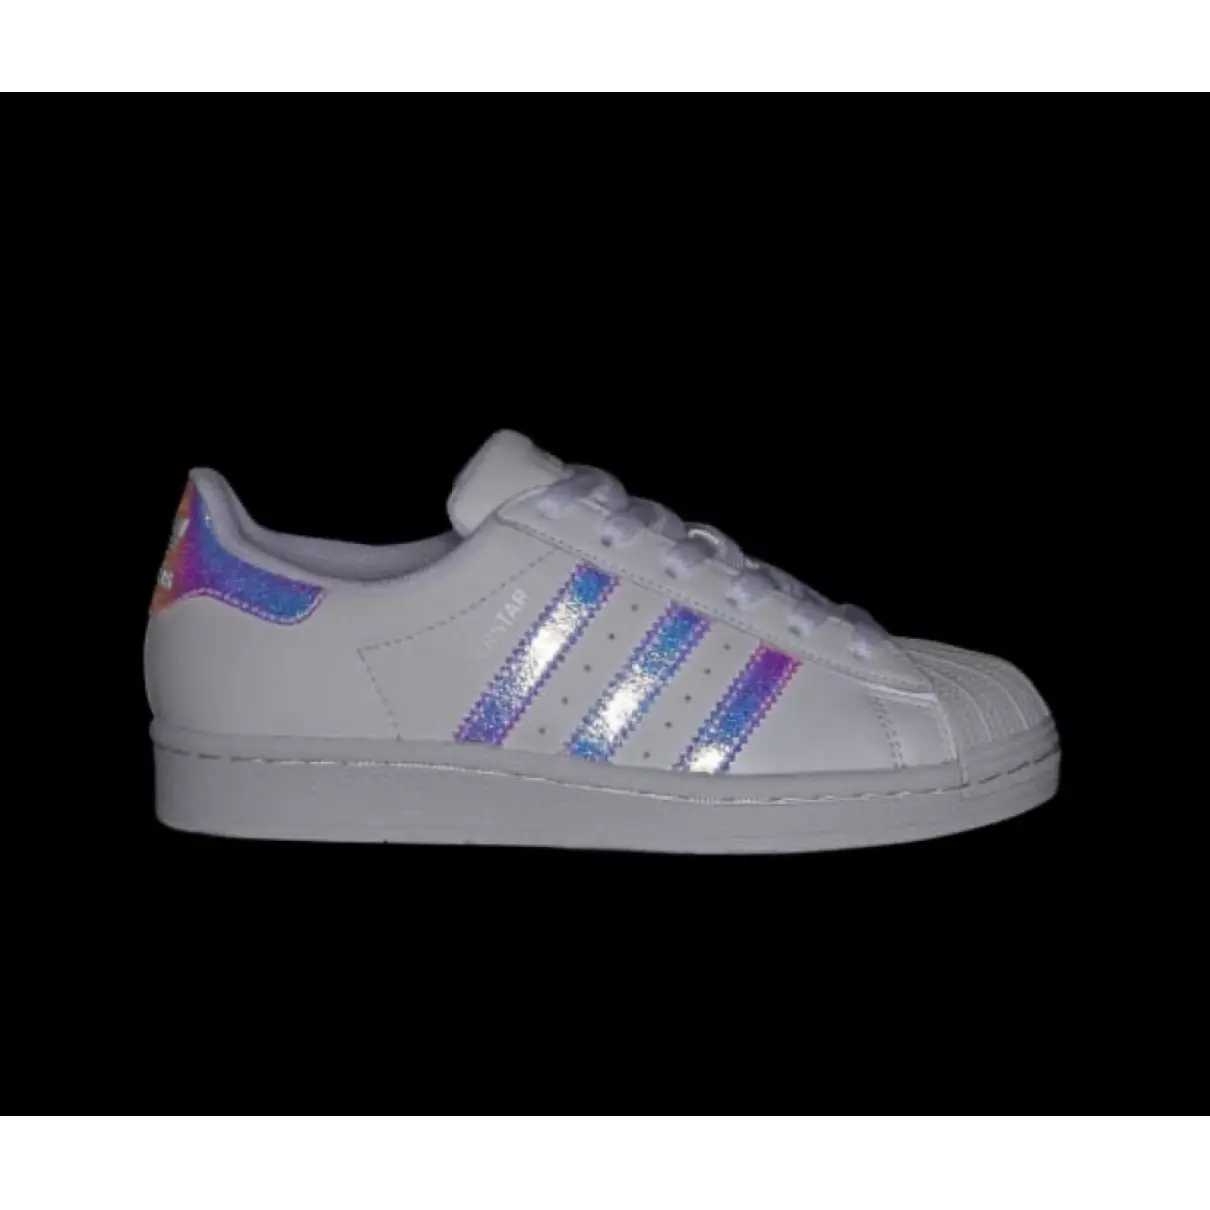 Buy Adidas Superstar leather trainers online